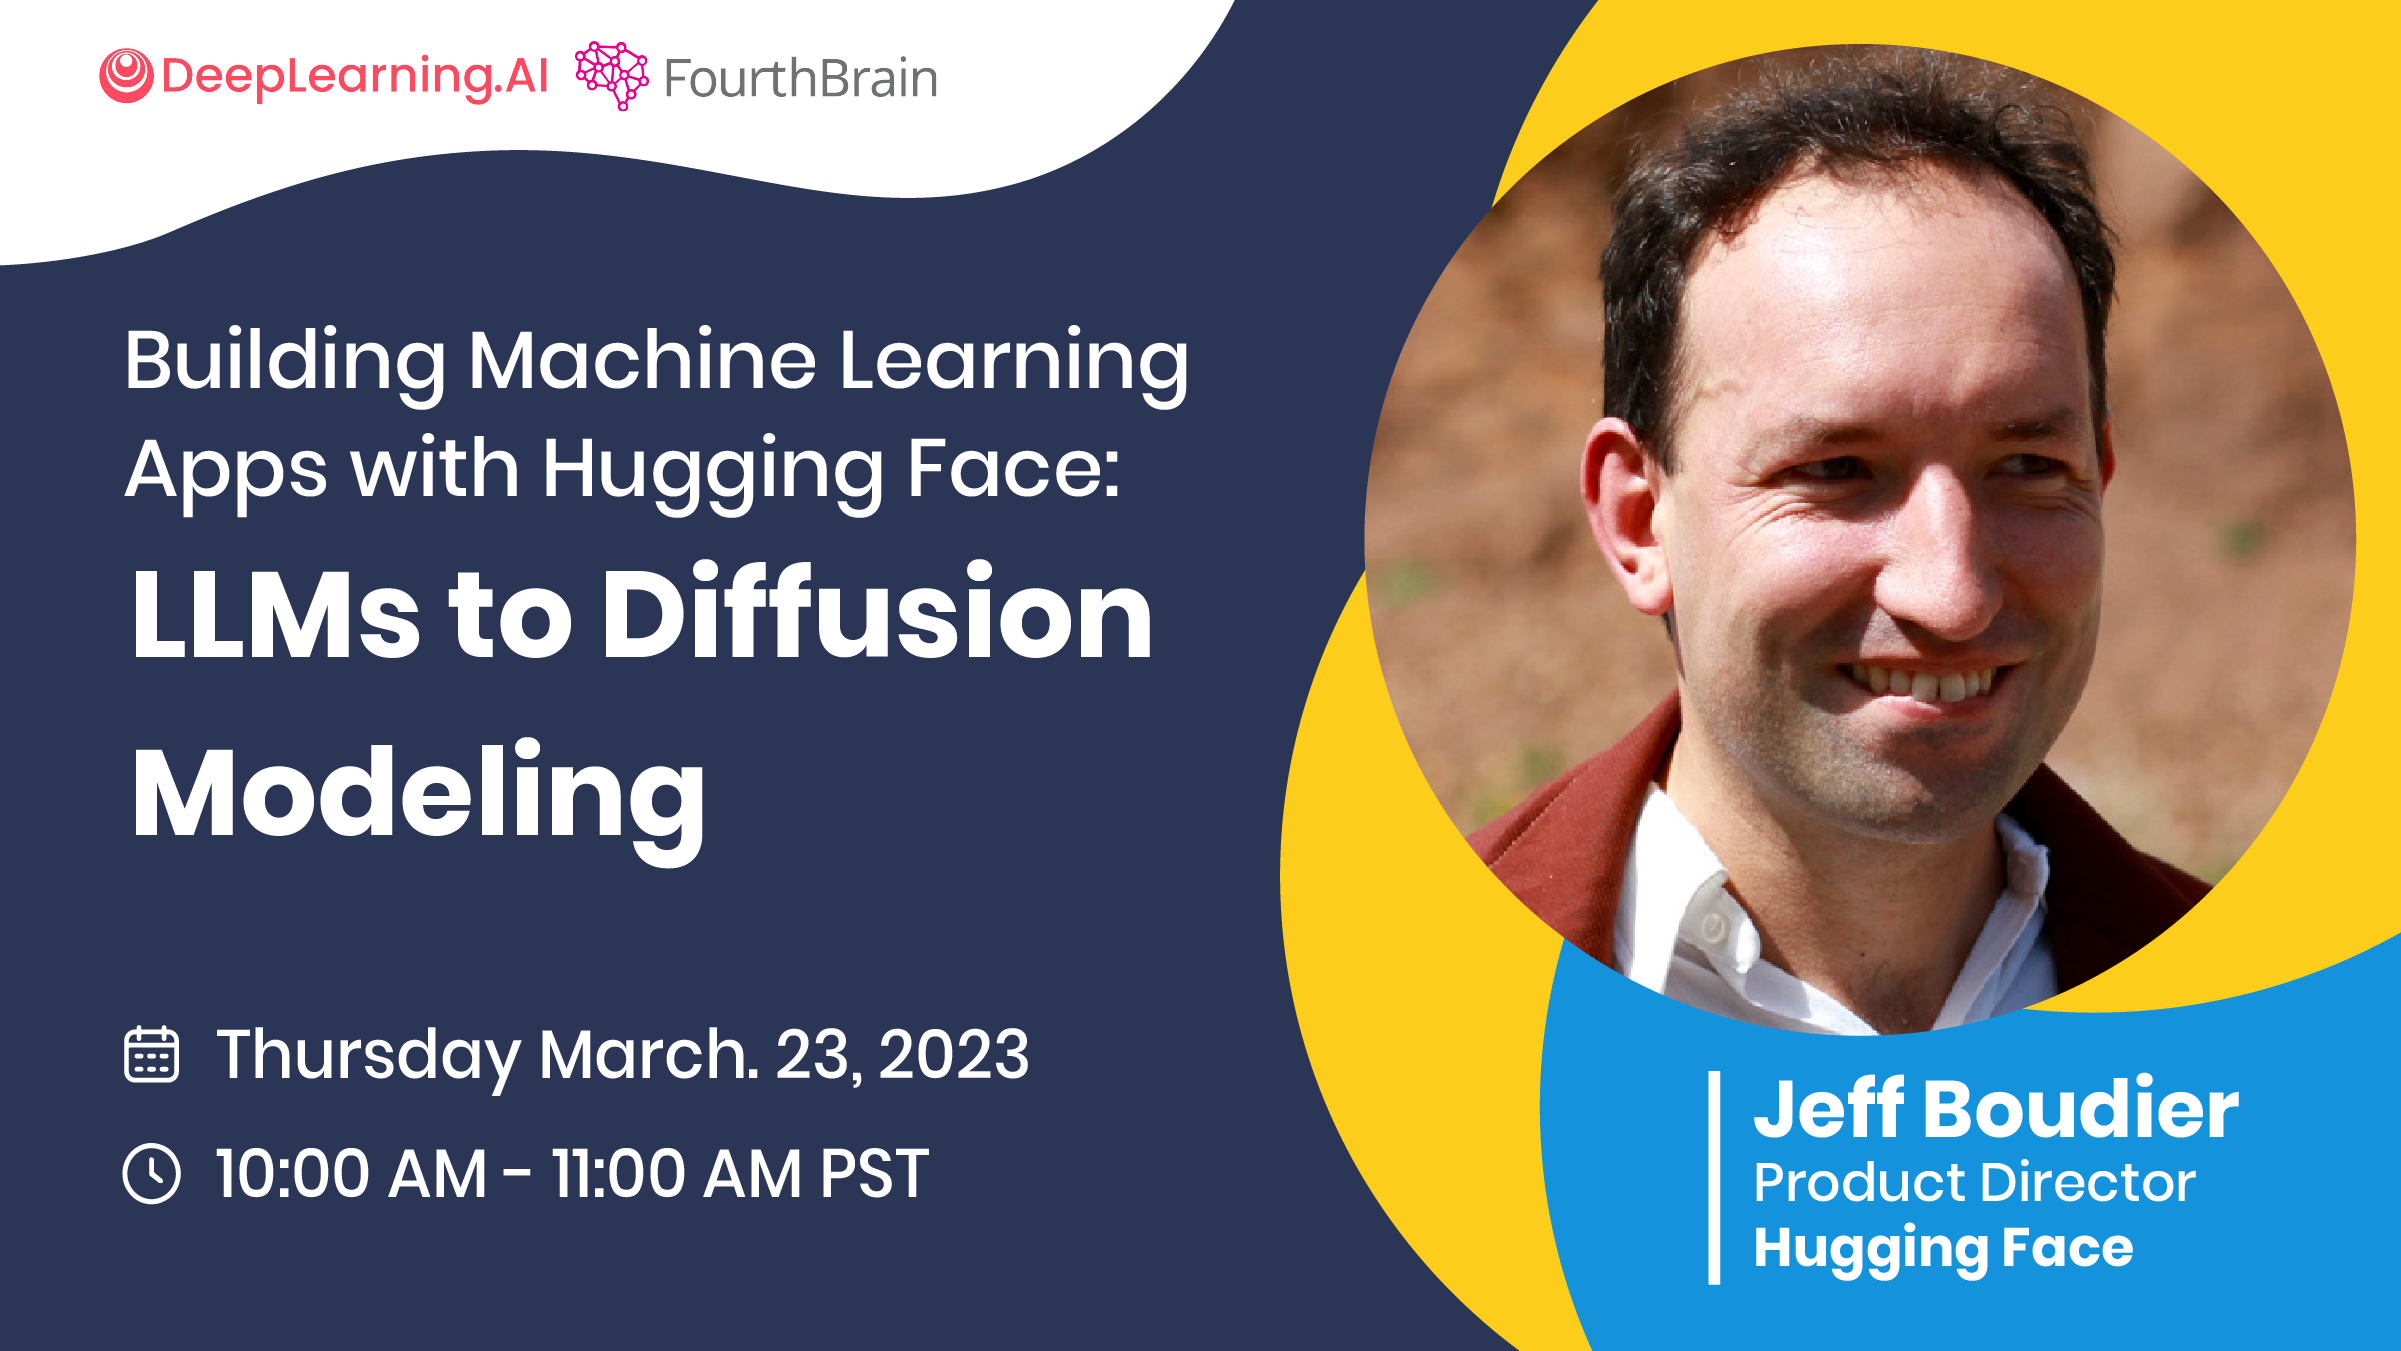 Building Machine Learning Apps with Hugging Face workshop banner ad